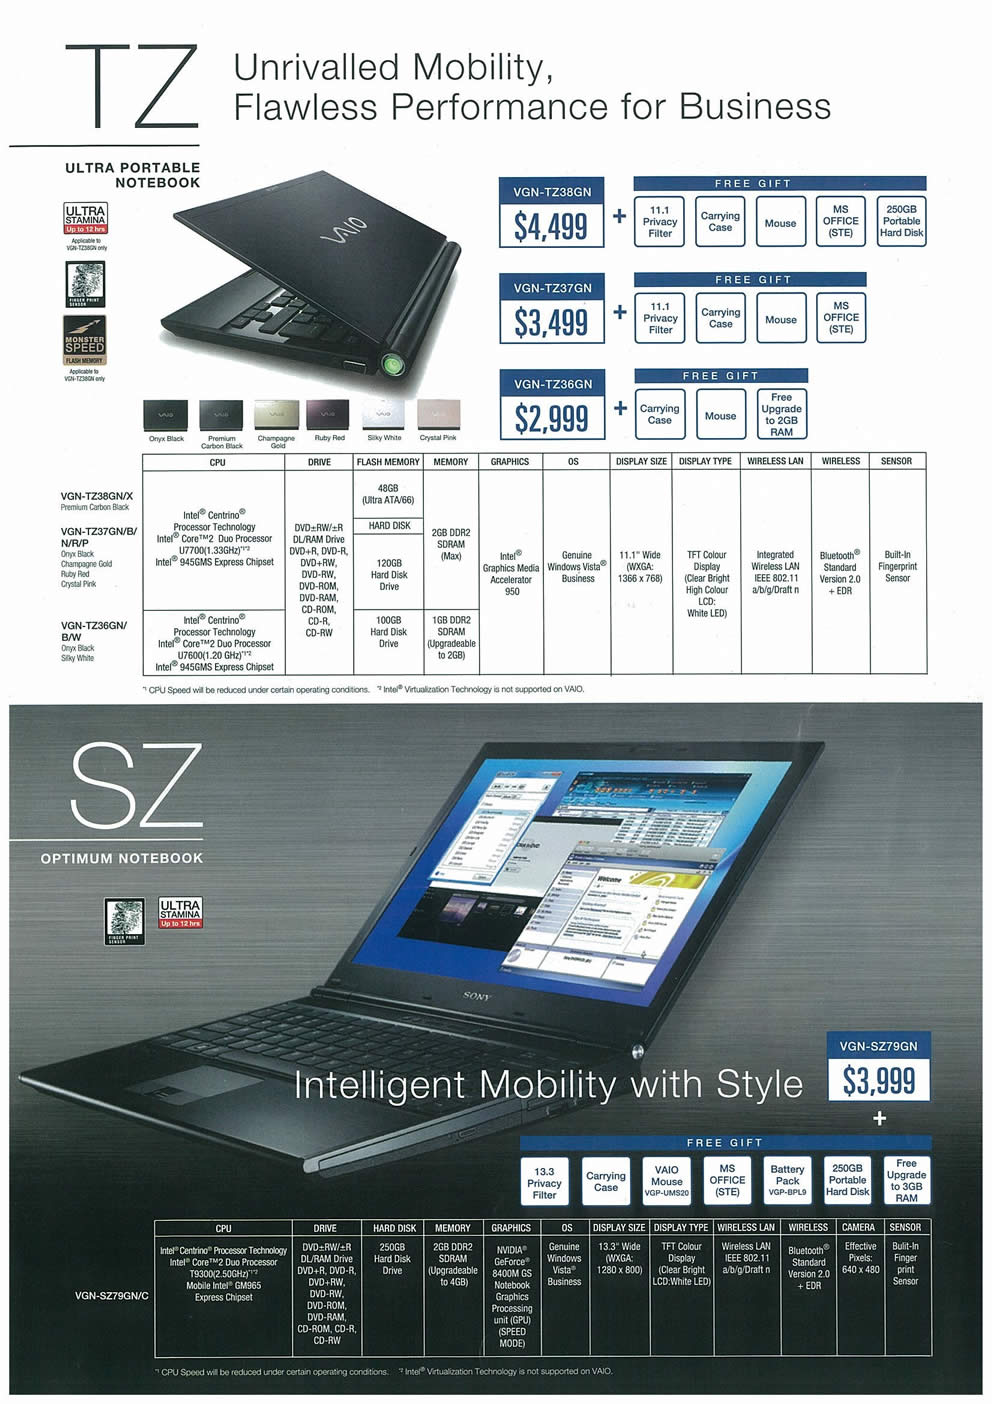 Comex 2008 price list image brochure of Sony VAIO Page 2